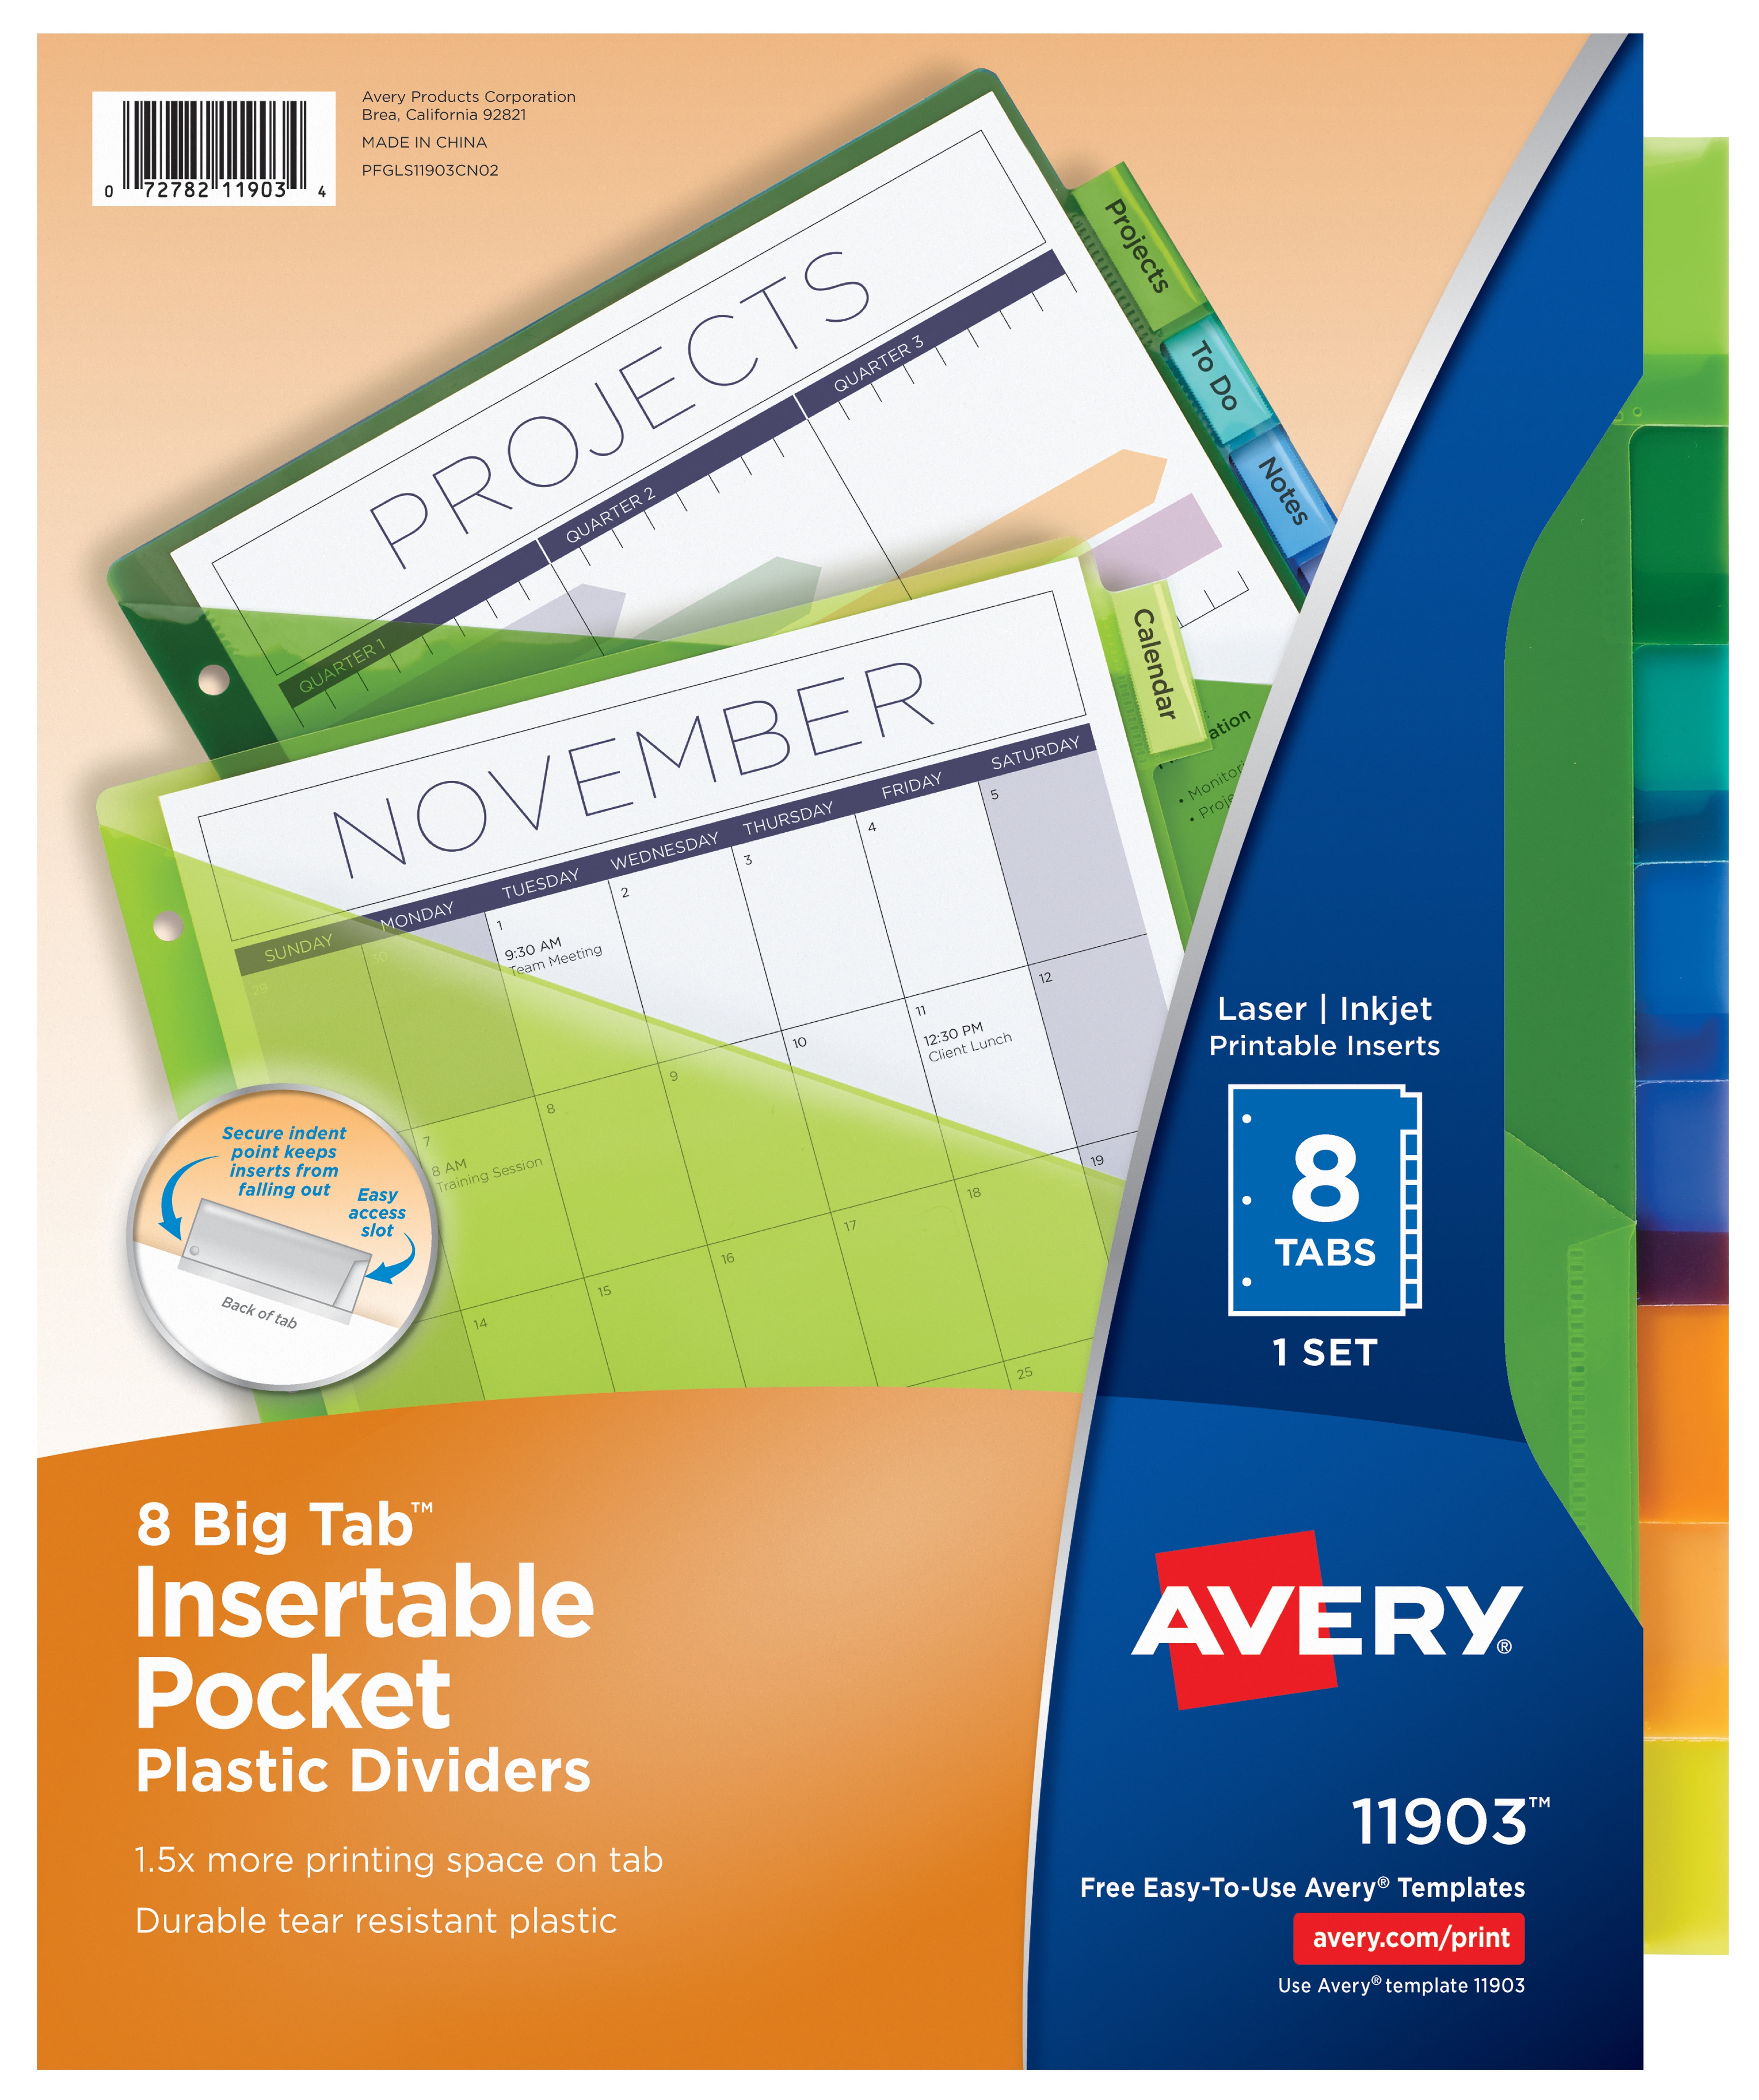 7708 Avery 5-Tab Plastic Binder Dividers with Pockets Assorted Designs - New 1 Set Insertable Clear Big Tabs 